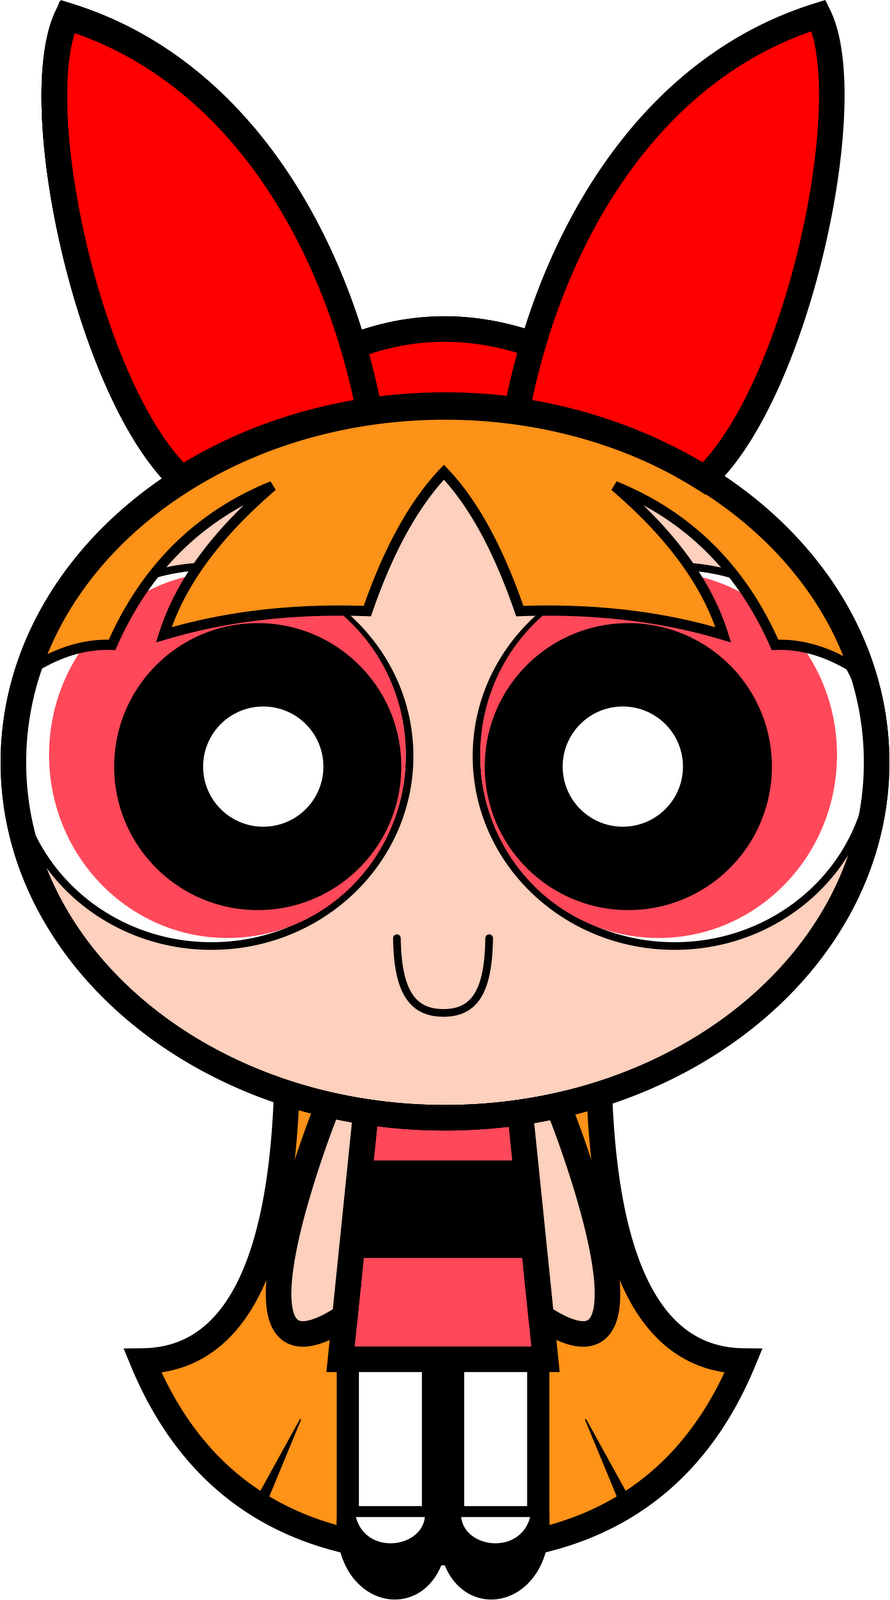 Download PNG image - Blossom Powerpuff Girls PNG Transparent Images 